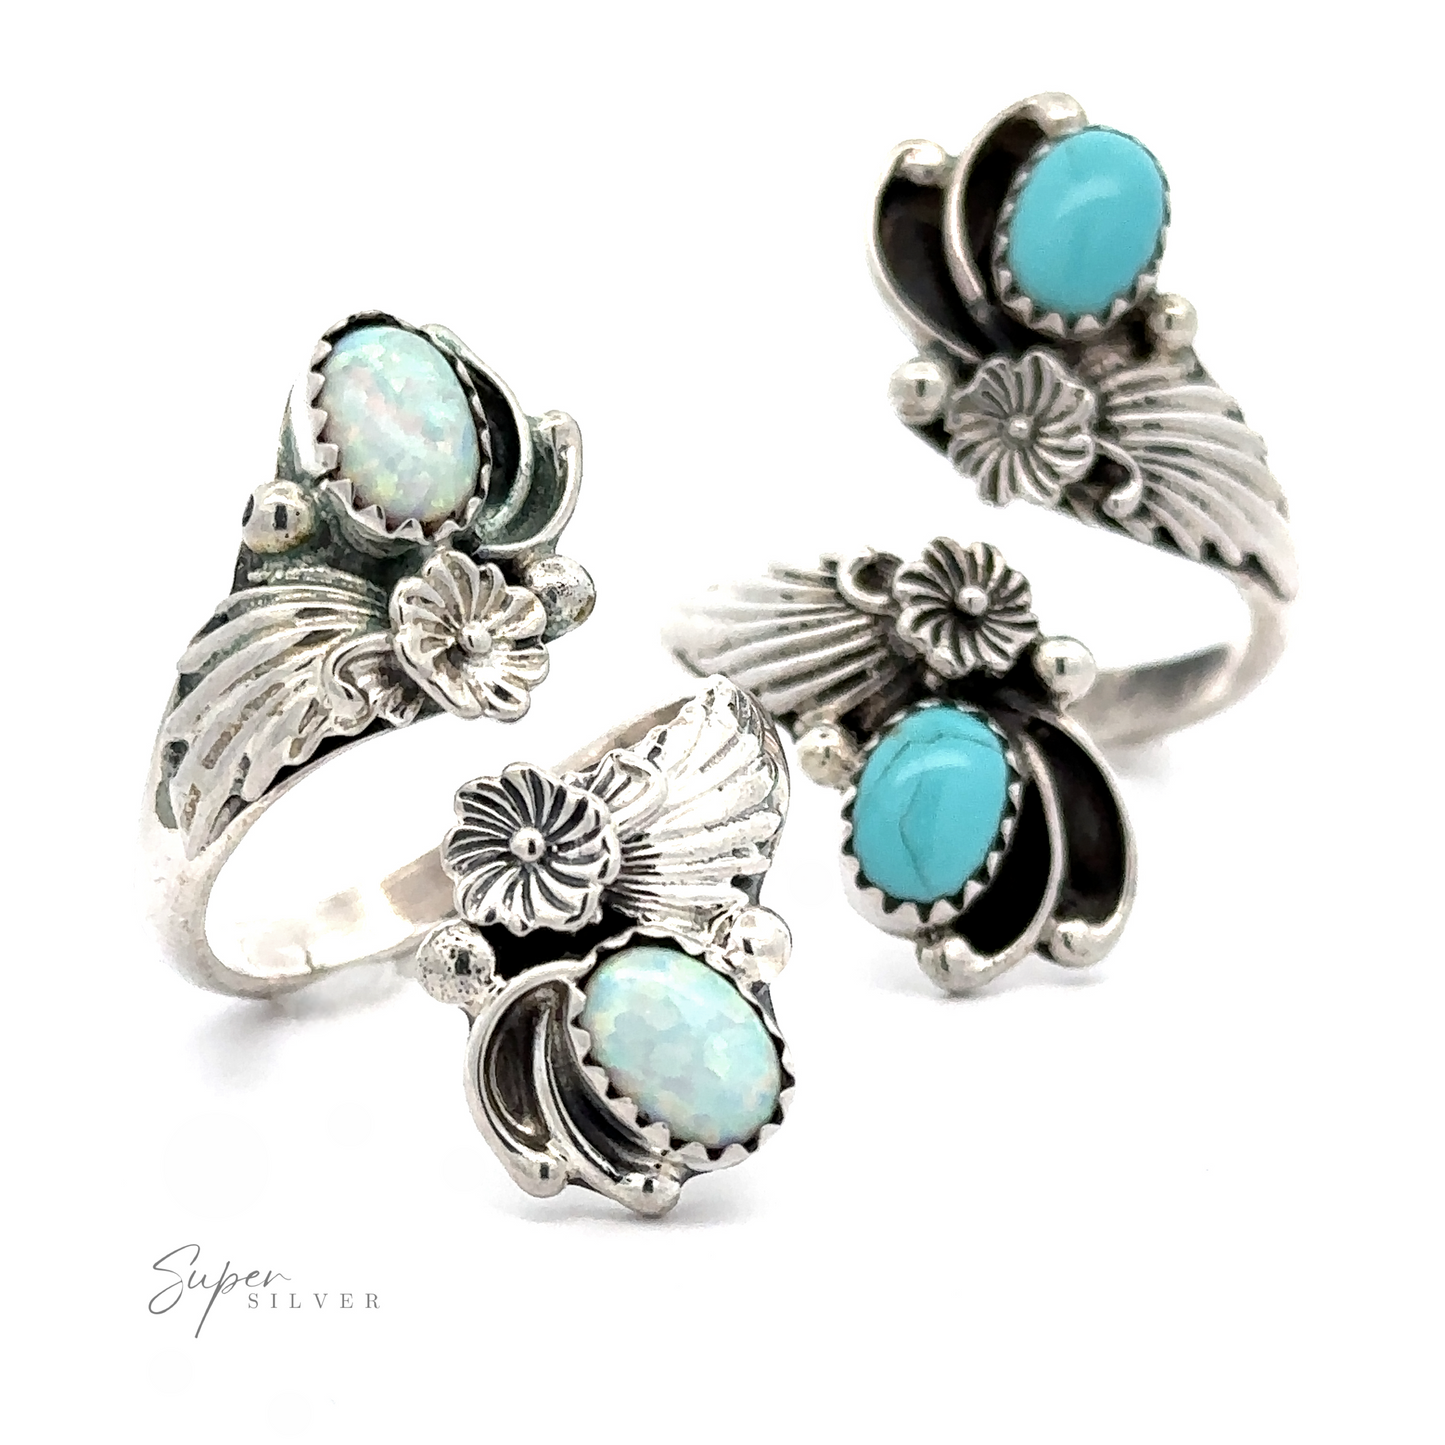 Three Native American Adjustable Stone Floral Wrap Rings, each featuring Native American floral designs and embedded with polished gemstones in turquoise and opal hues.